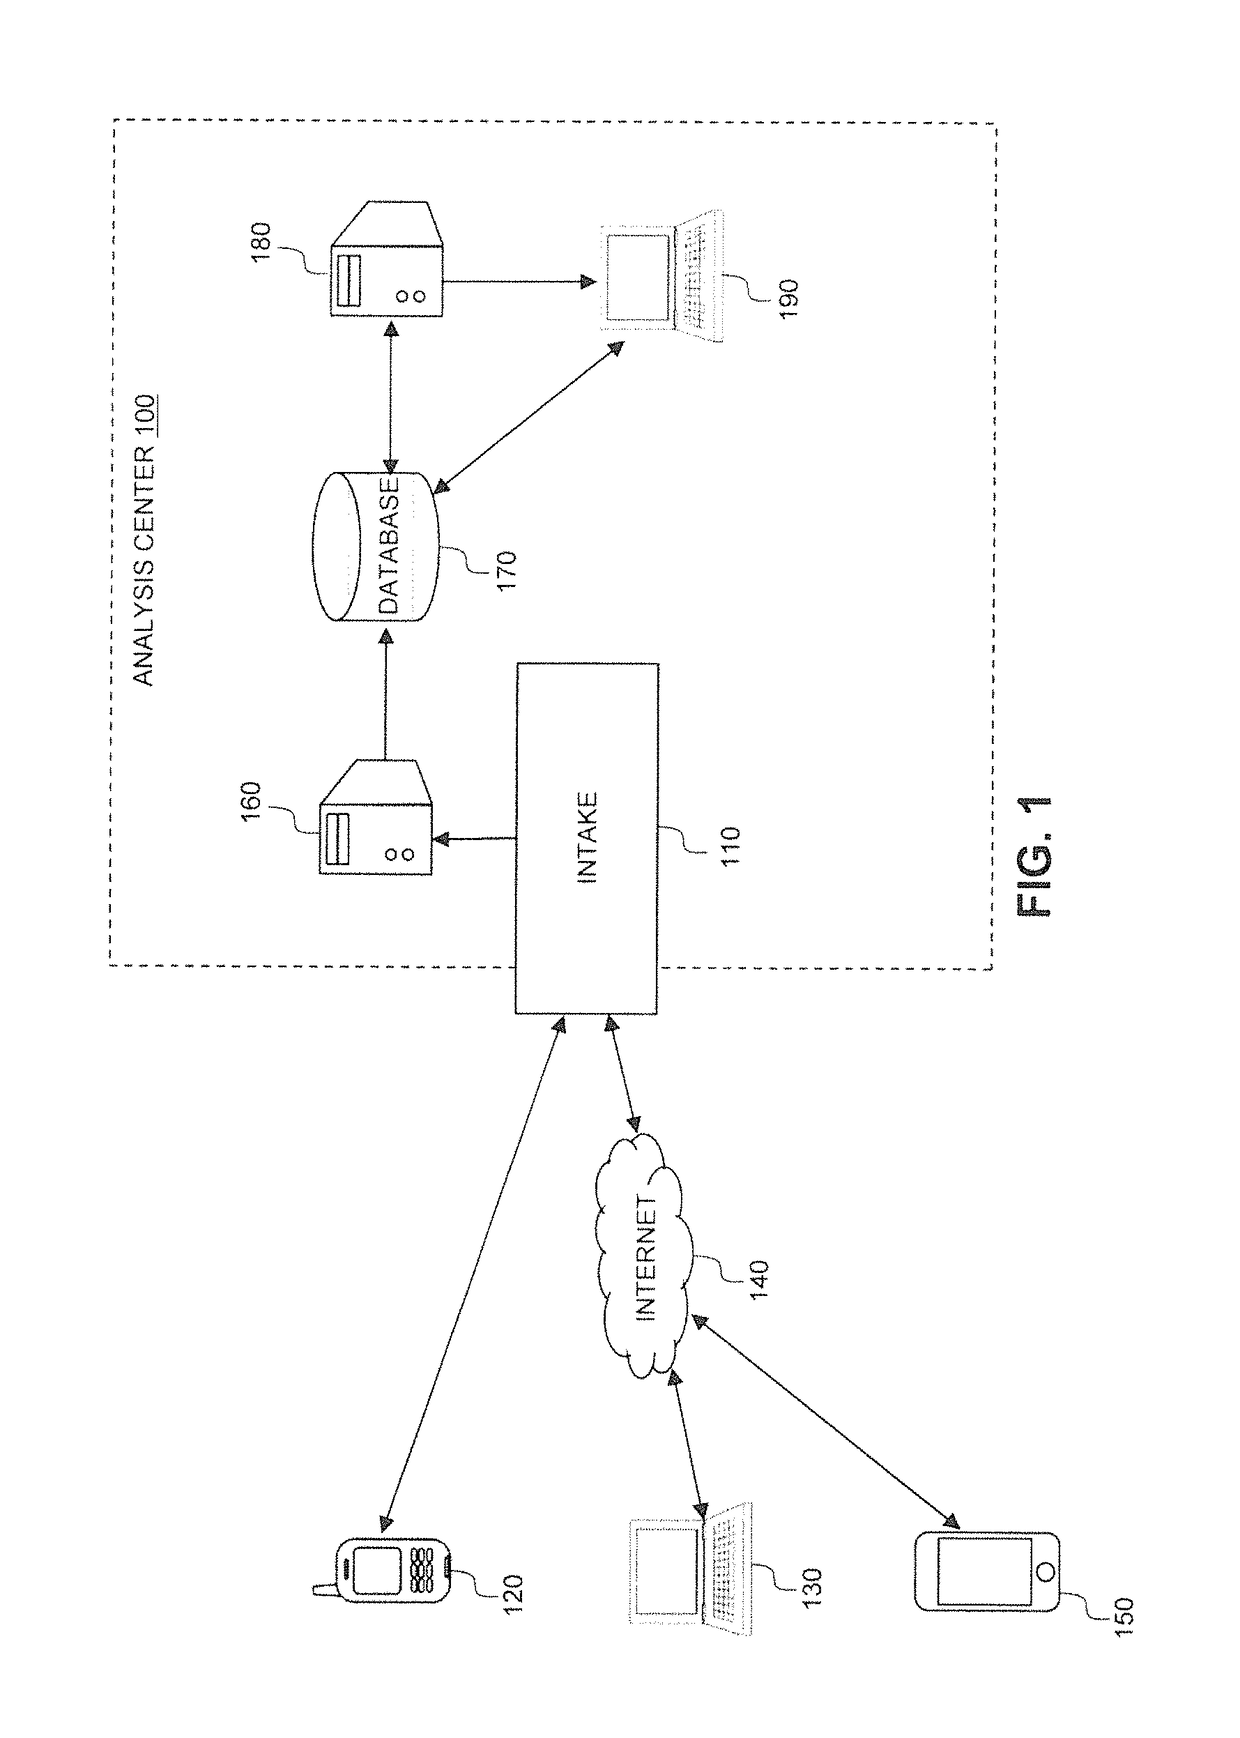 Trend identification and behavioral analytics system and methods